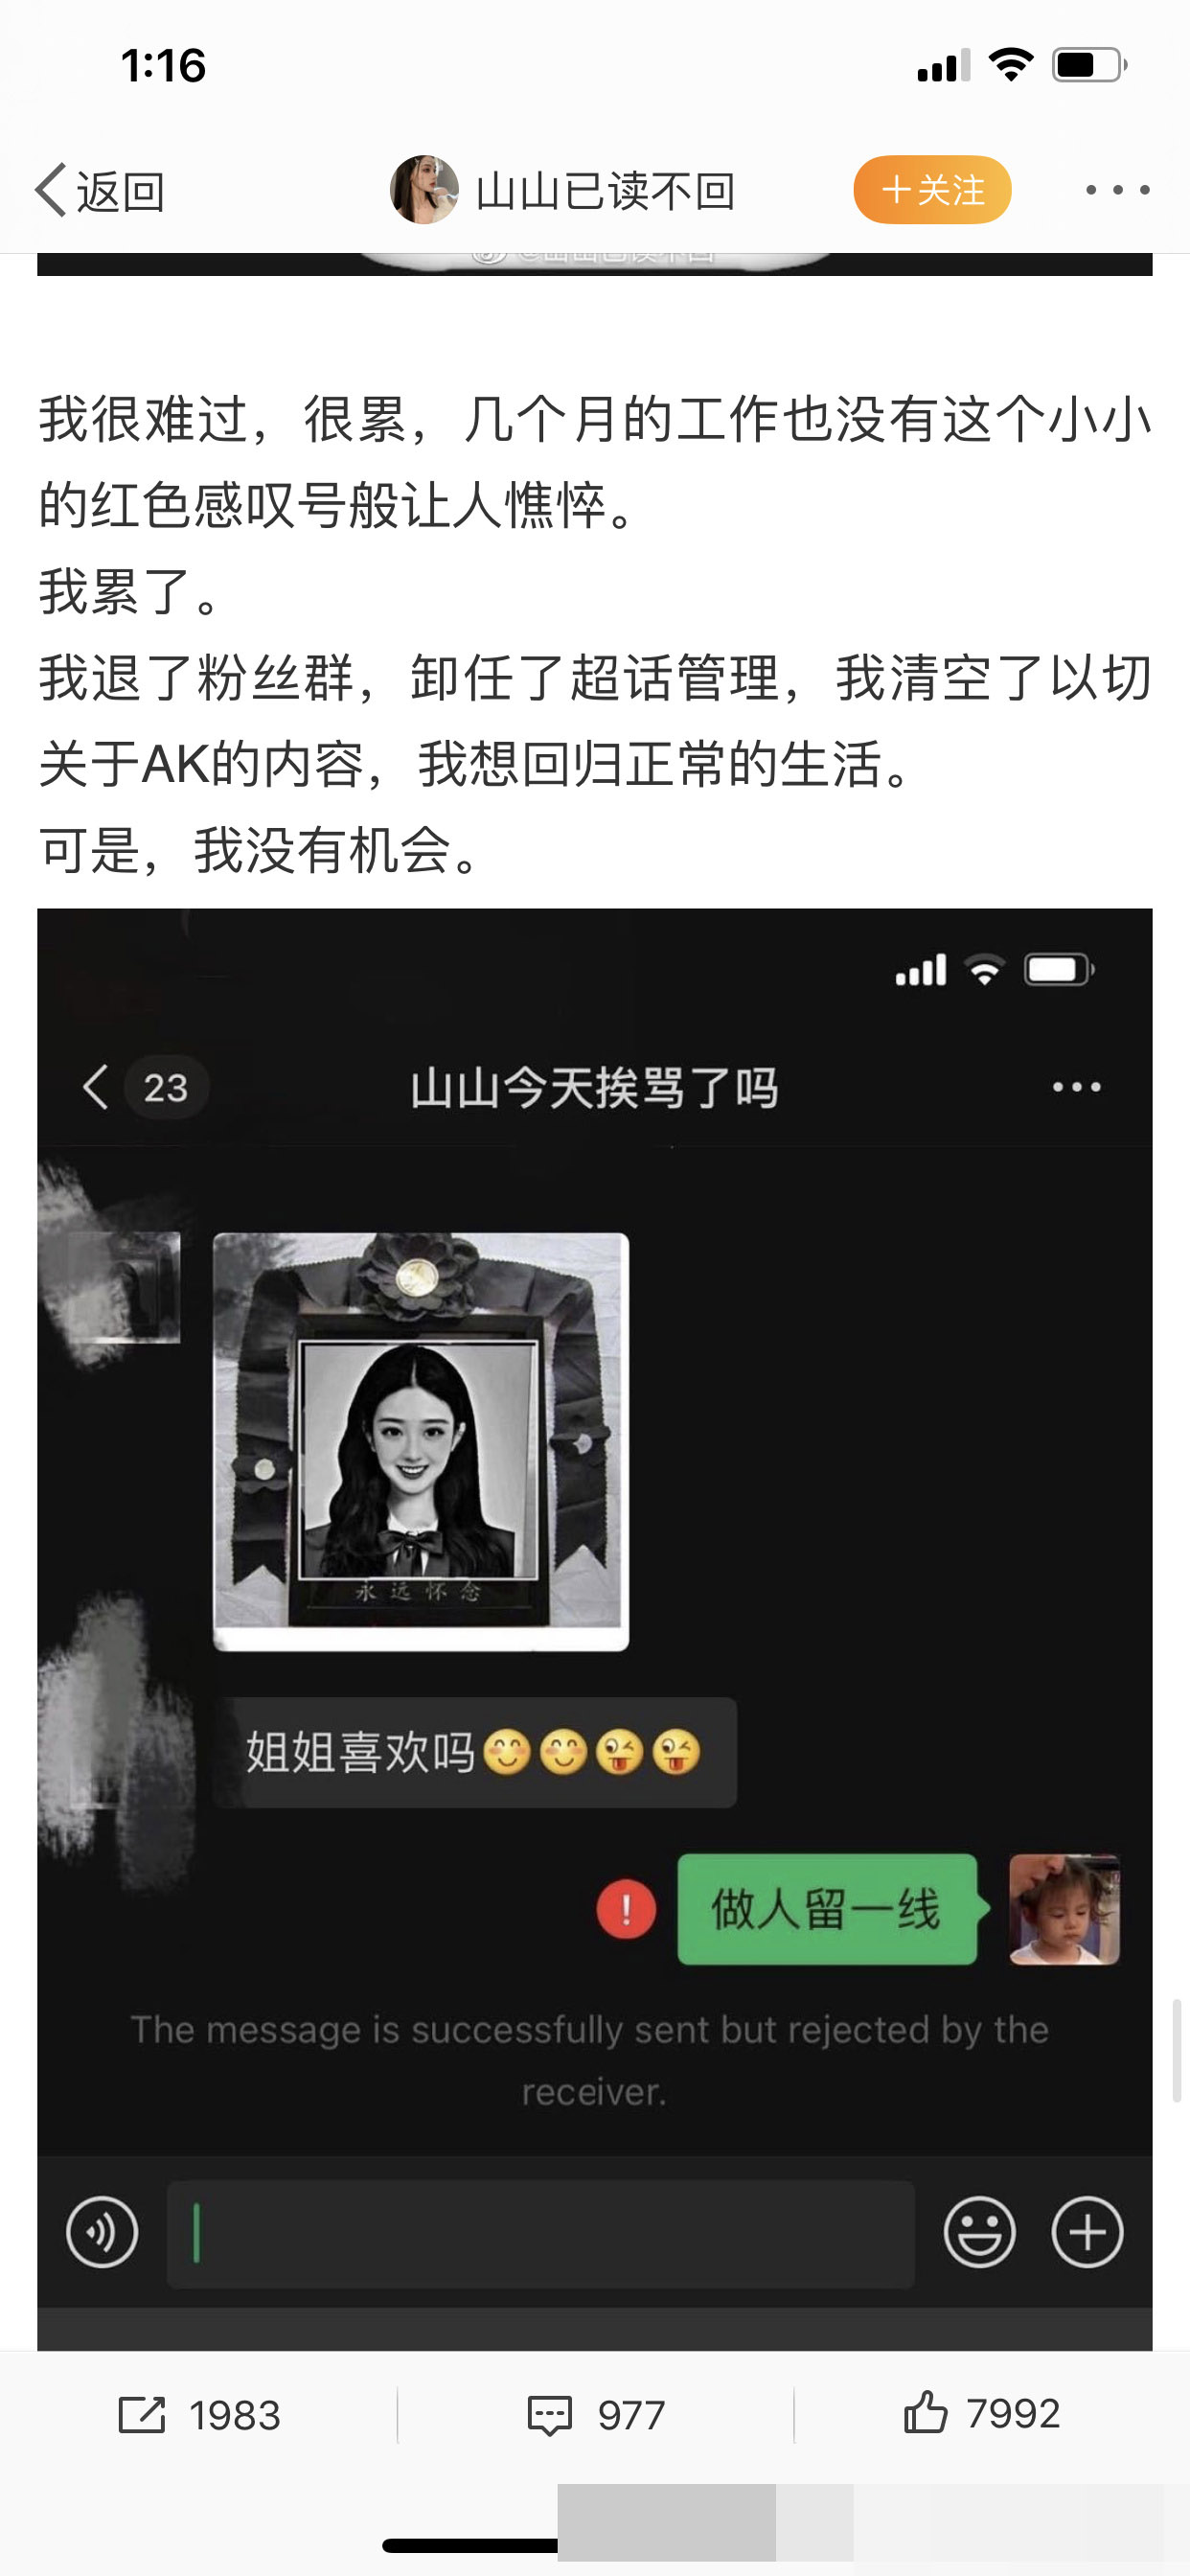 Is AK Liu Zhang ready? When love the beans is about to had done all black makings to be prepared by the psychology of exposure